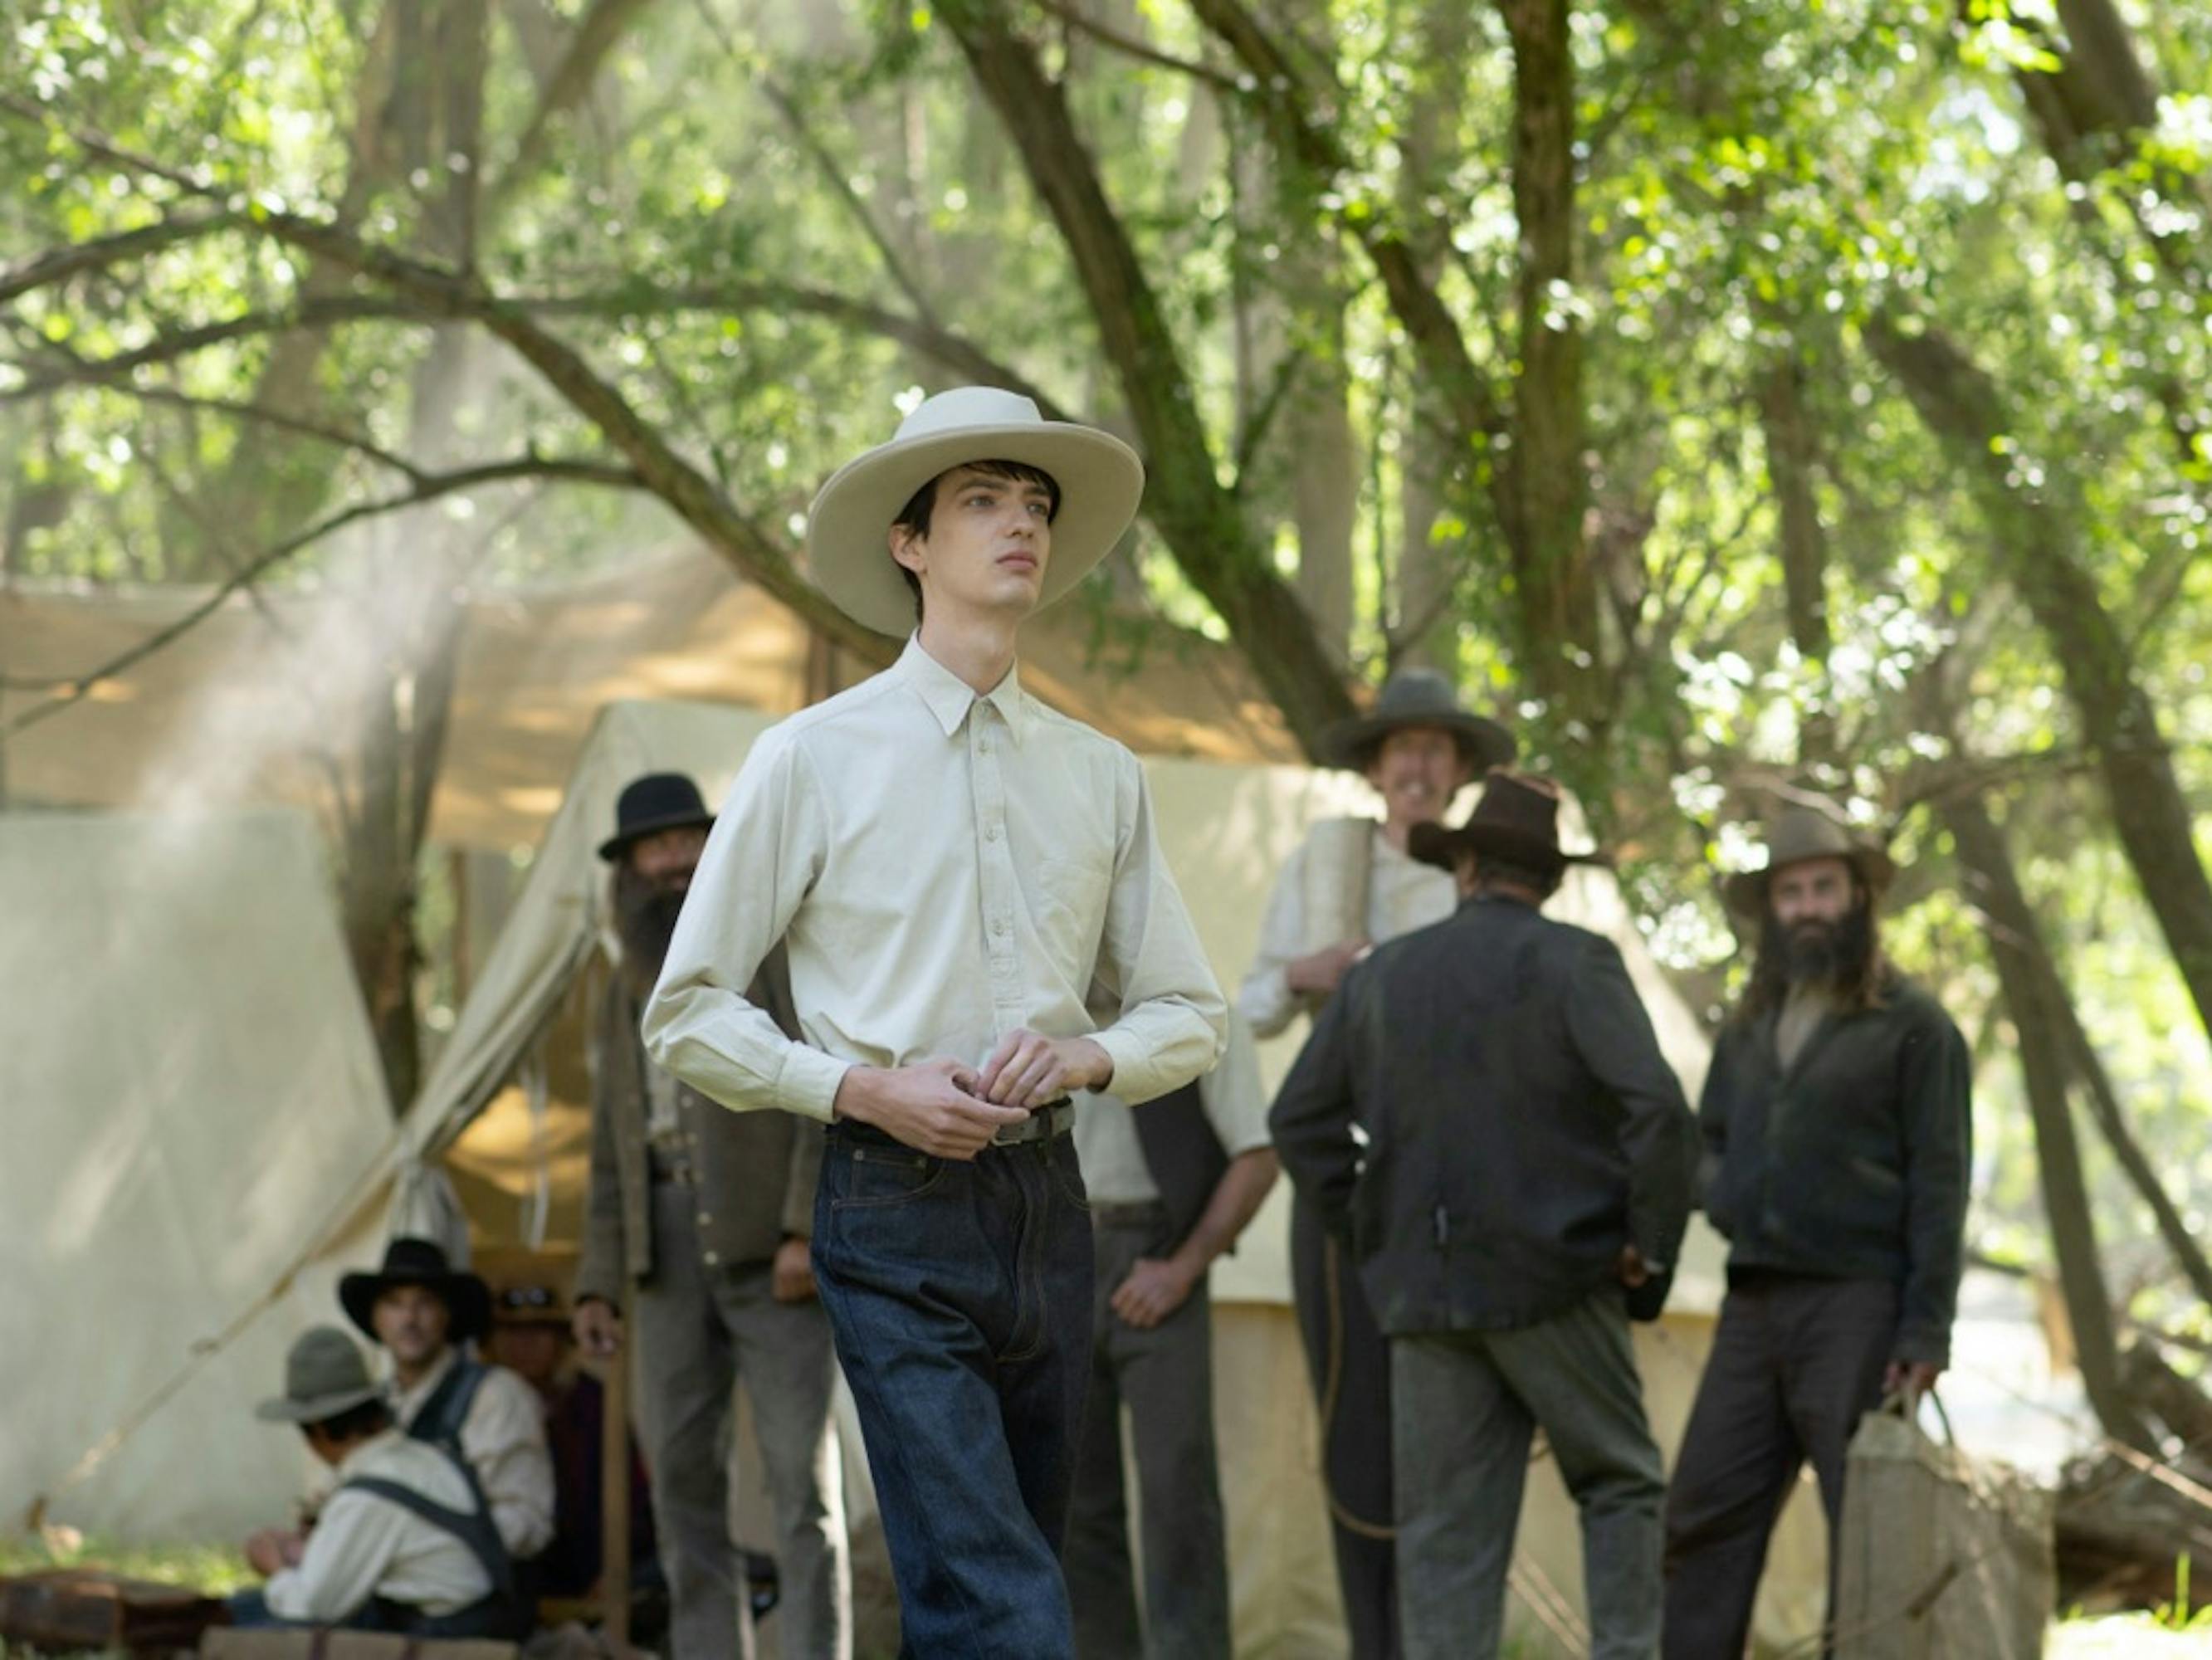 Kodi Smit-McPhee’s character Peter walks around a campsite in a white hat, white shirt, and dark pants. In the background mingle men in dark jackets, hats, and white shirts. Dappled sunlight lits this Western scene.